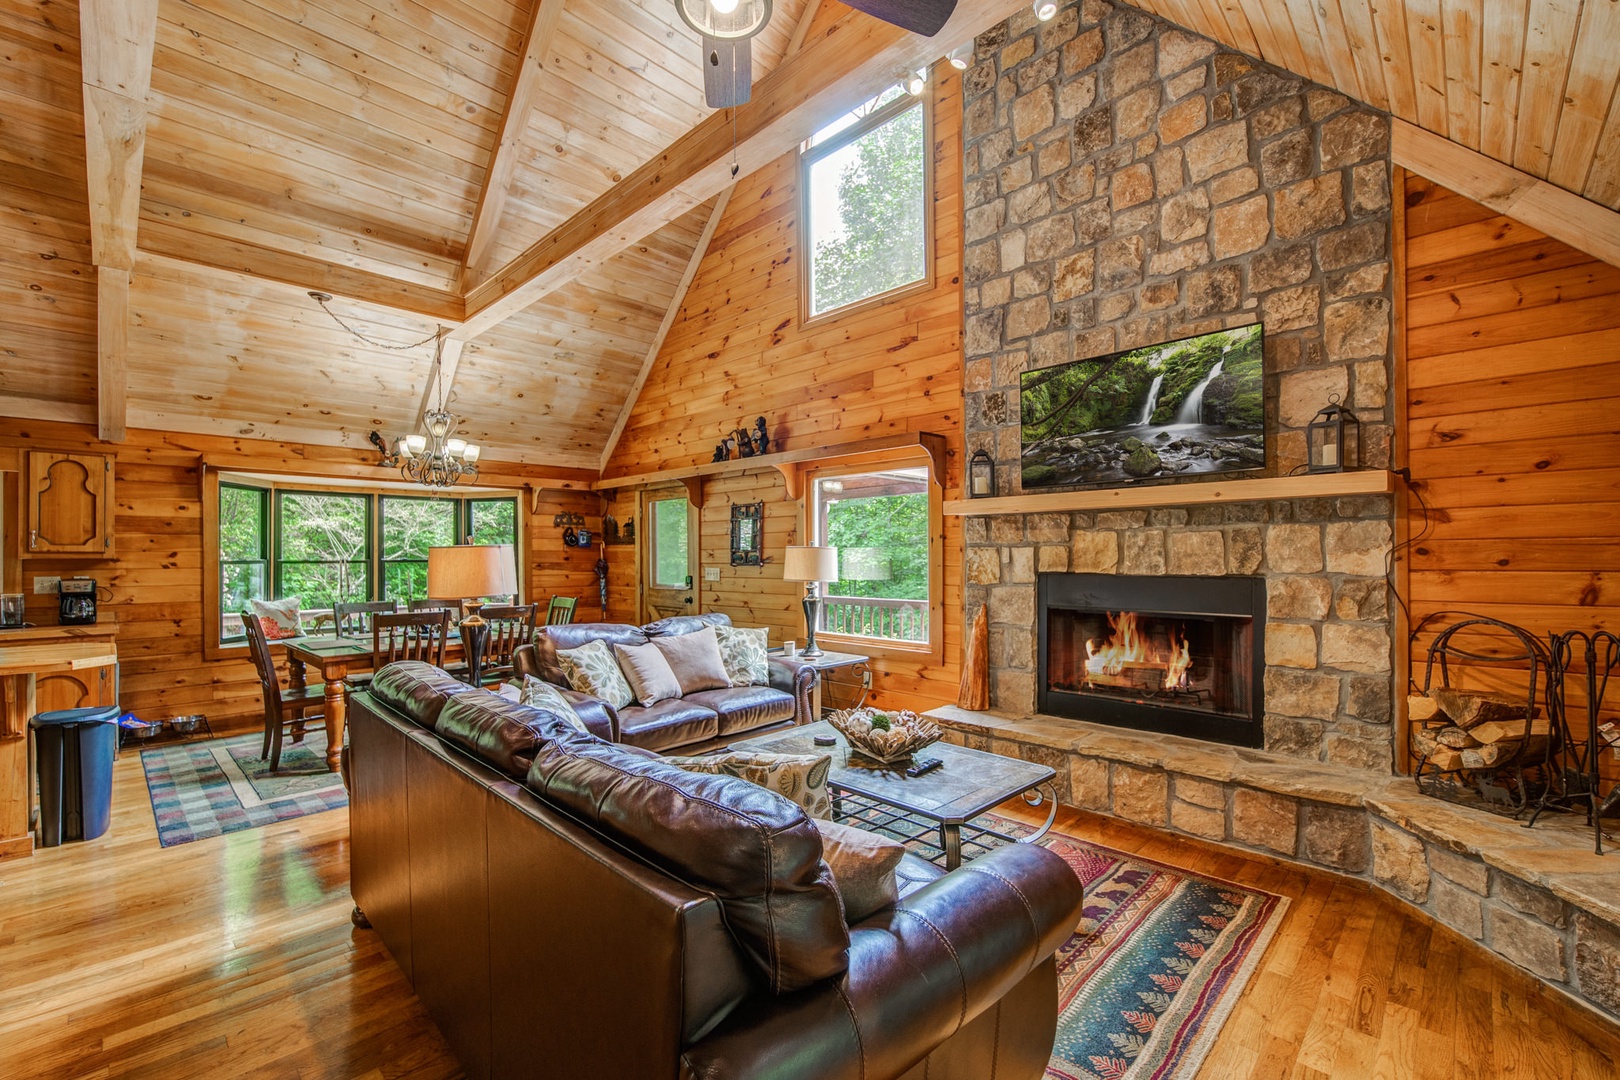 Curl up to enjoy a movie by the fireplace in the cozy, spacious living area